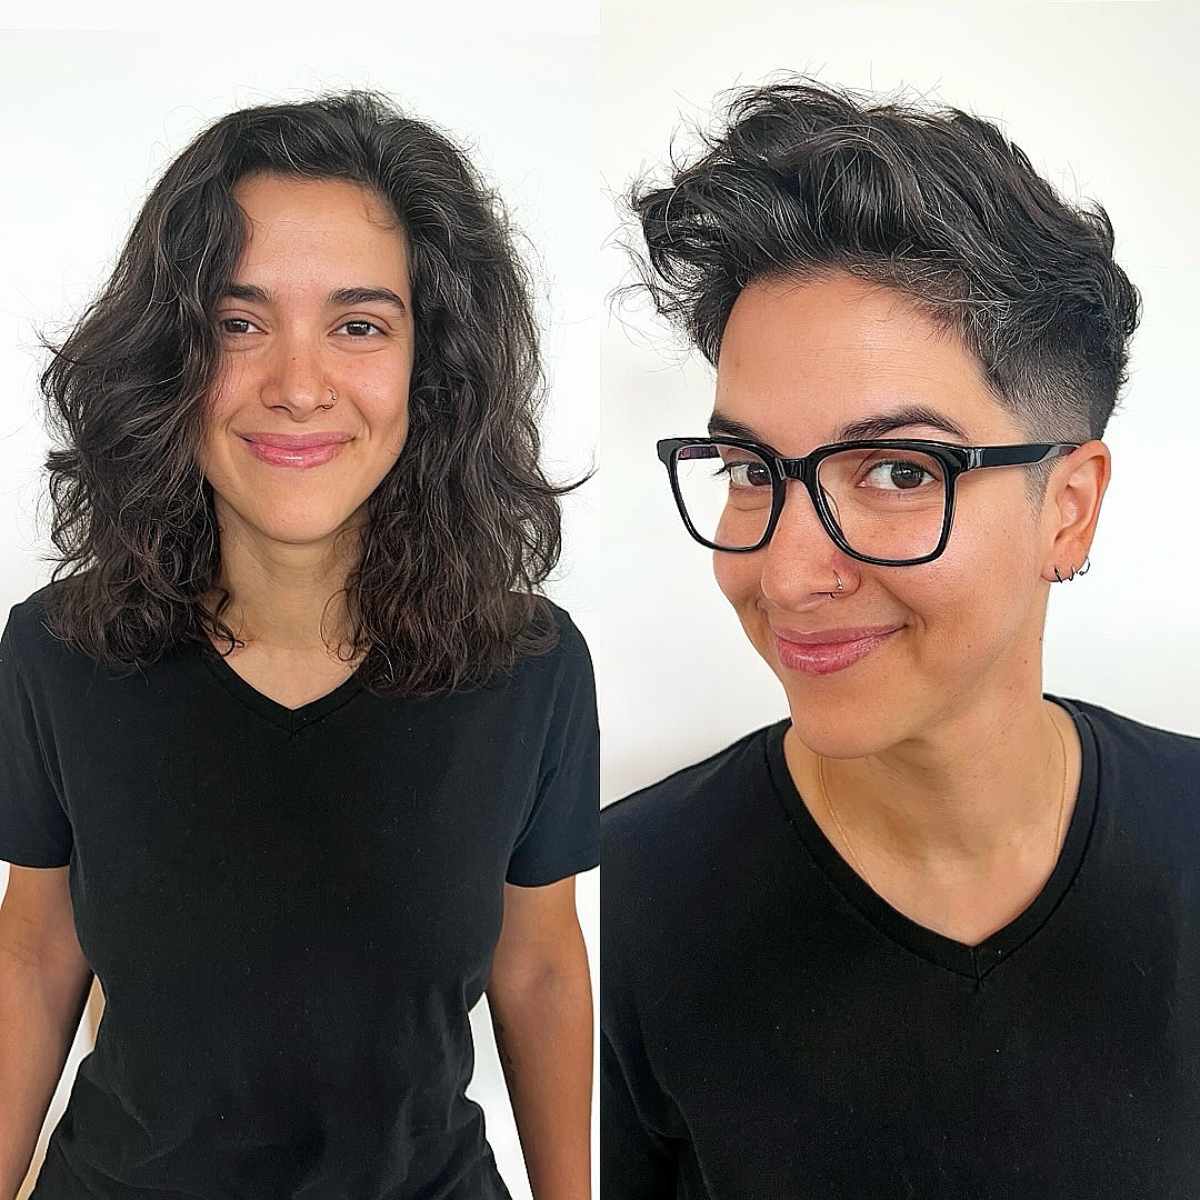 Curly bob transformed into a stylish undercut with voluminous top on thick, naturally curly hair